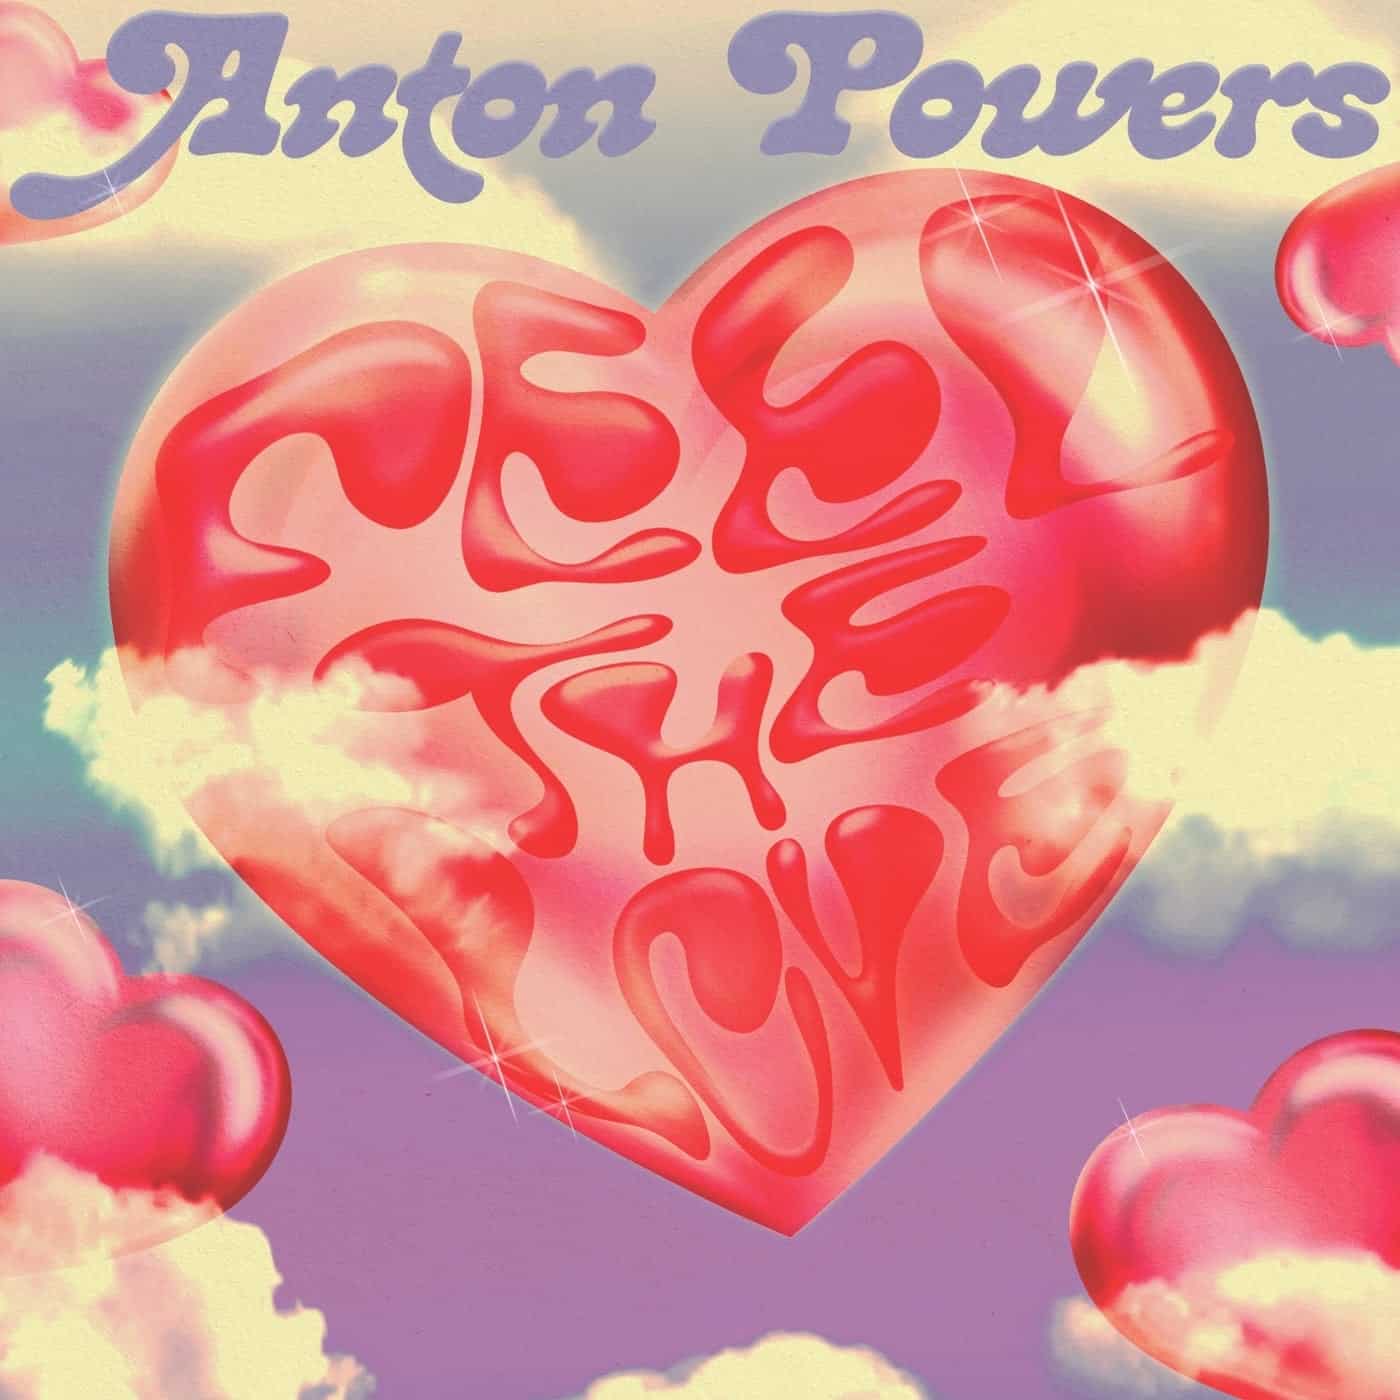 Download Anton Powers, Dee Freer - Feel The Love on Electrobuzz